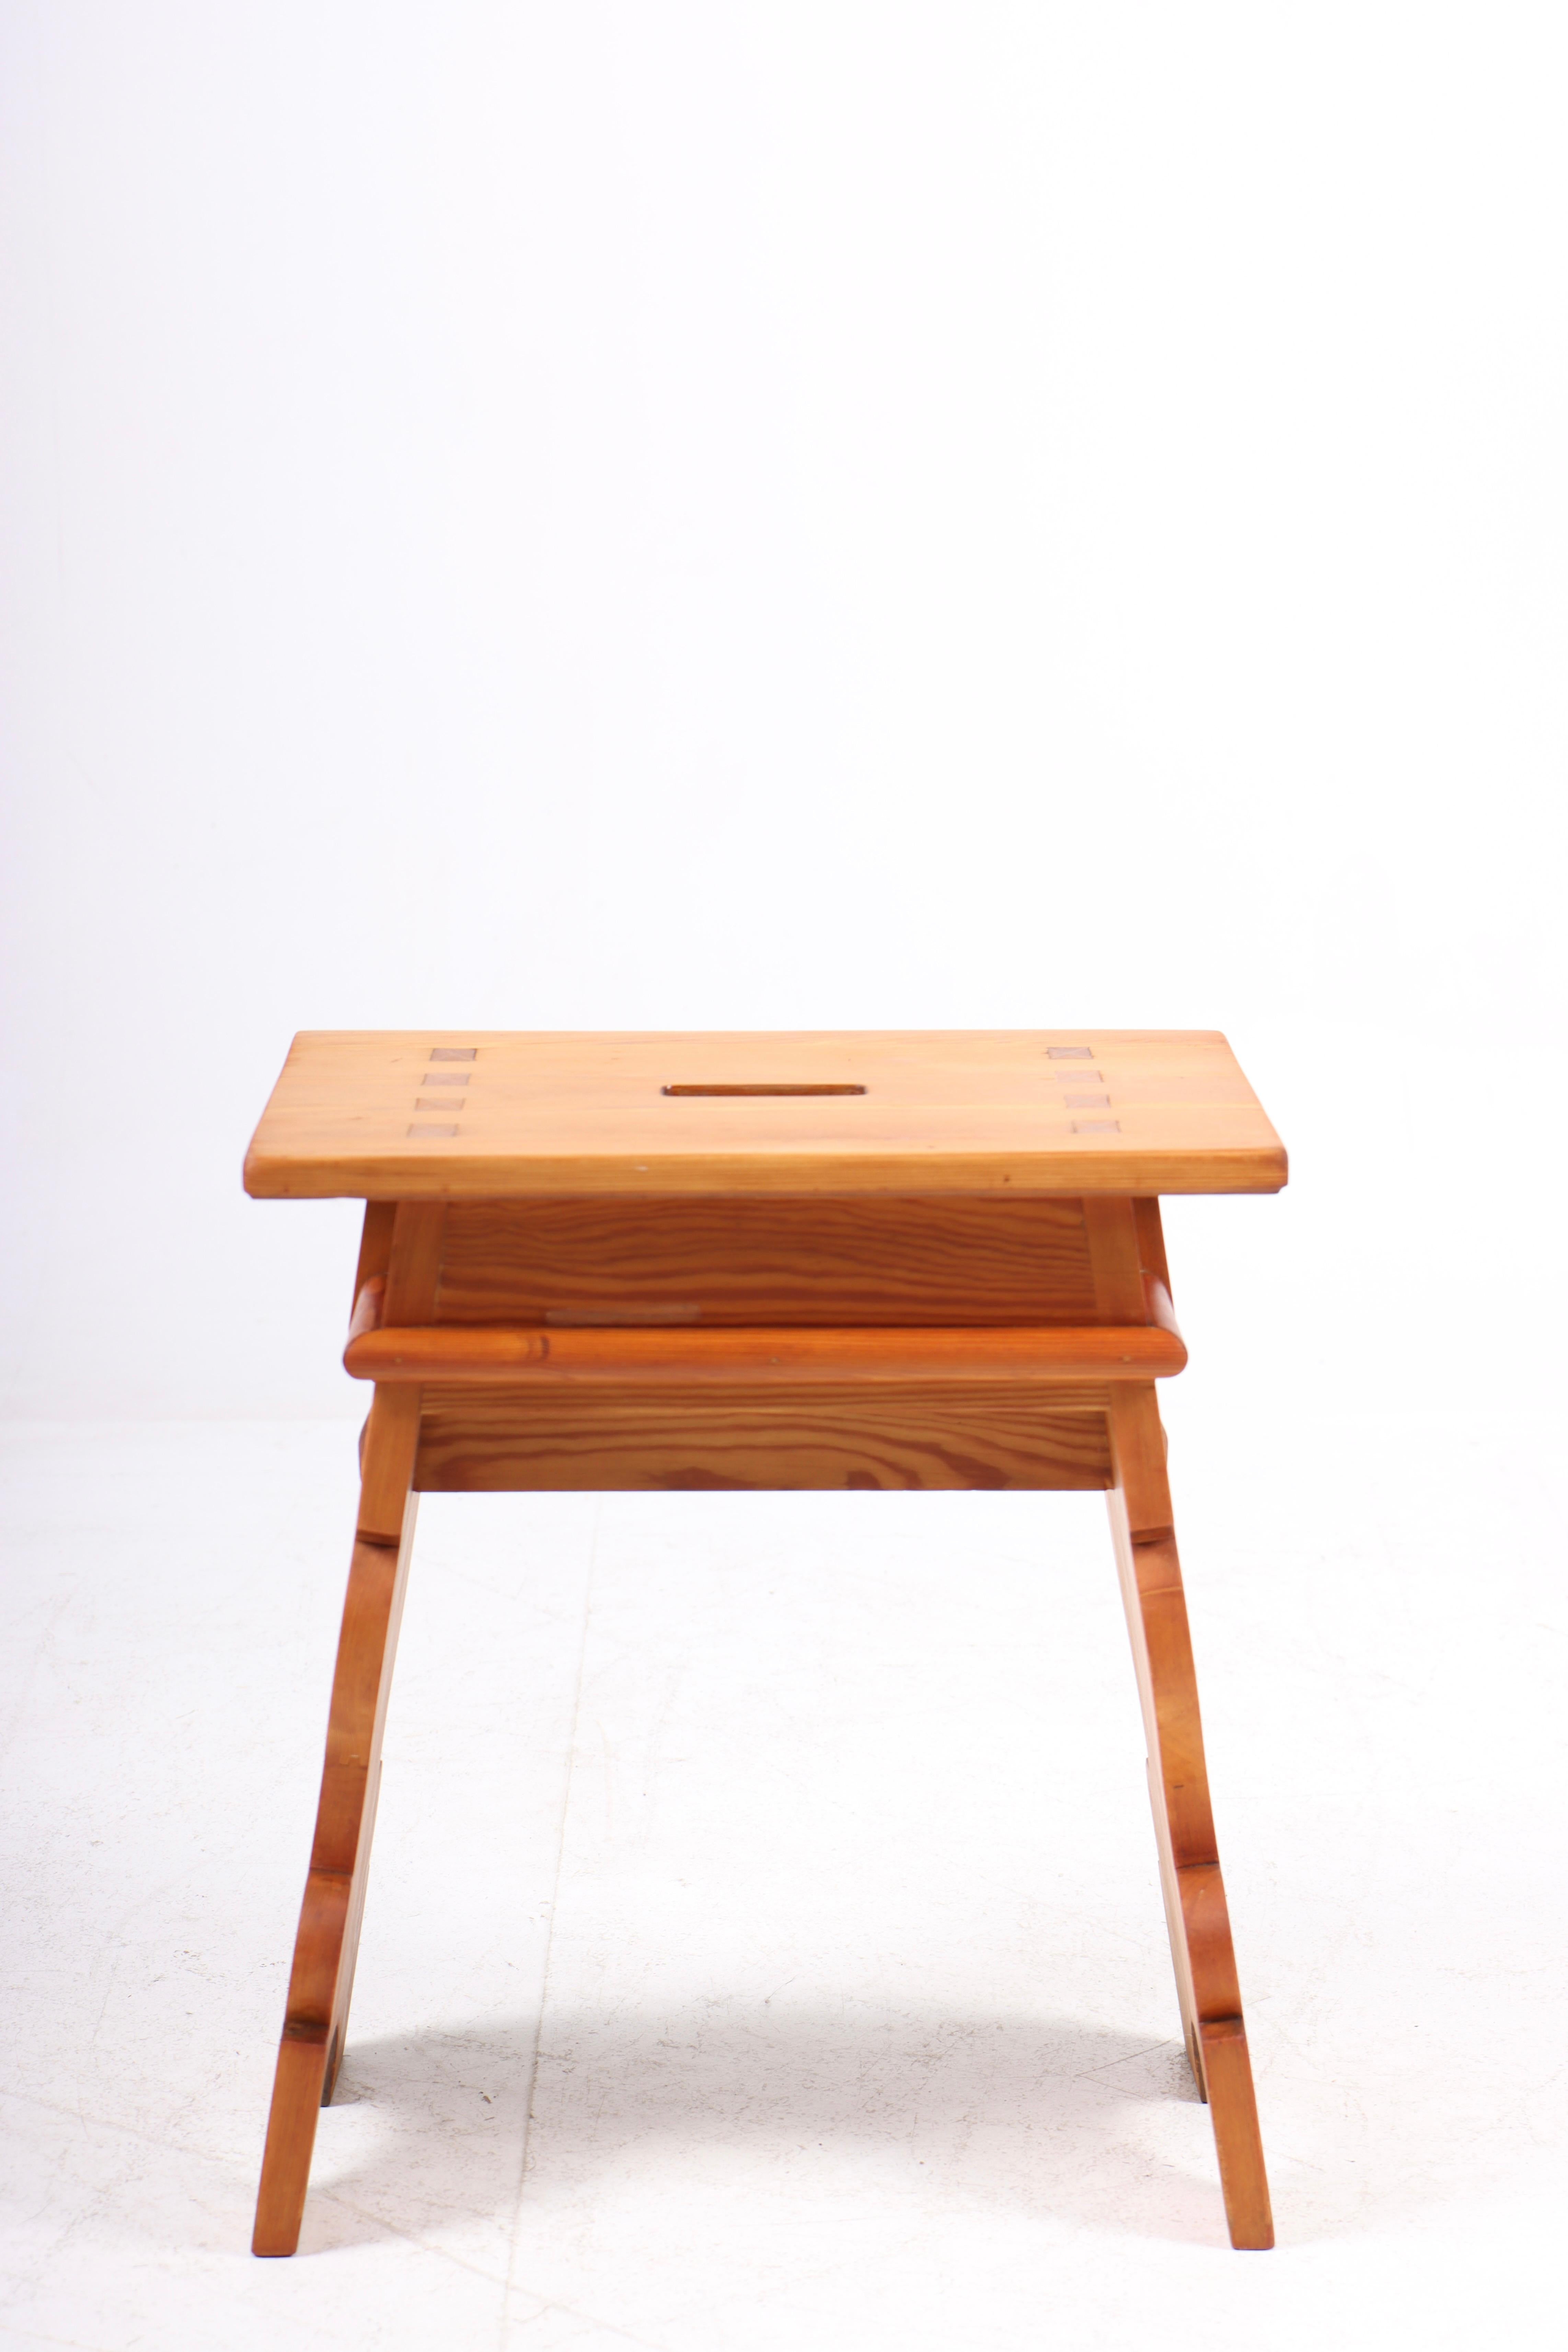 Stool in patinated solid pine. Designed by MAA. Martin Nyrop as interior for Copenhagen town hall in 1905. Made in Denmark by Cabinetmaker Rud Rasmussen cabinetmakers. Great original condition.

